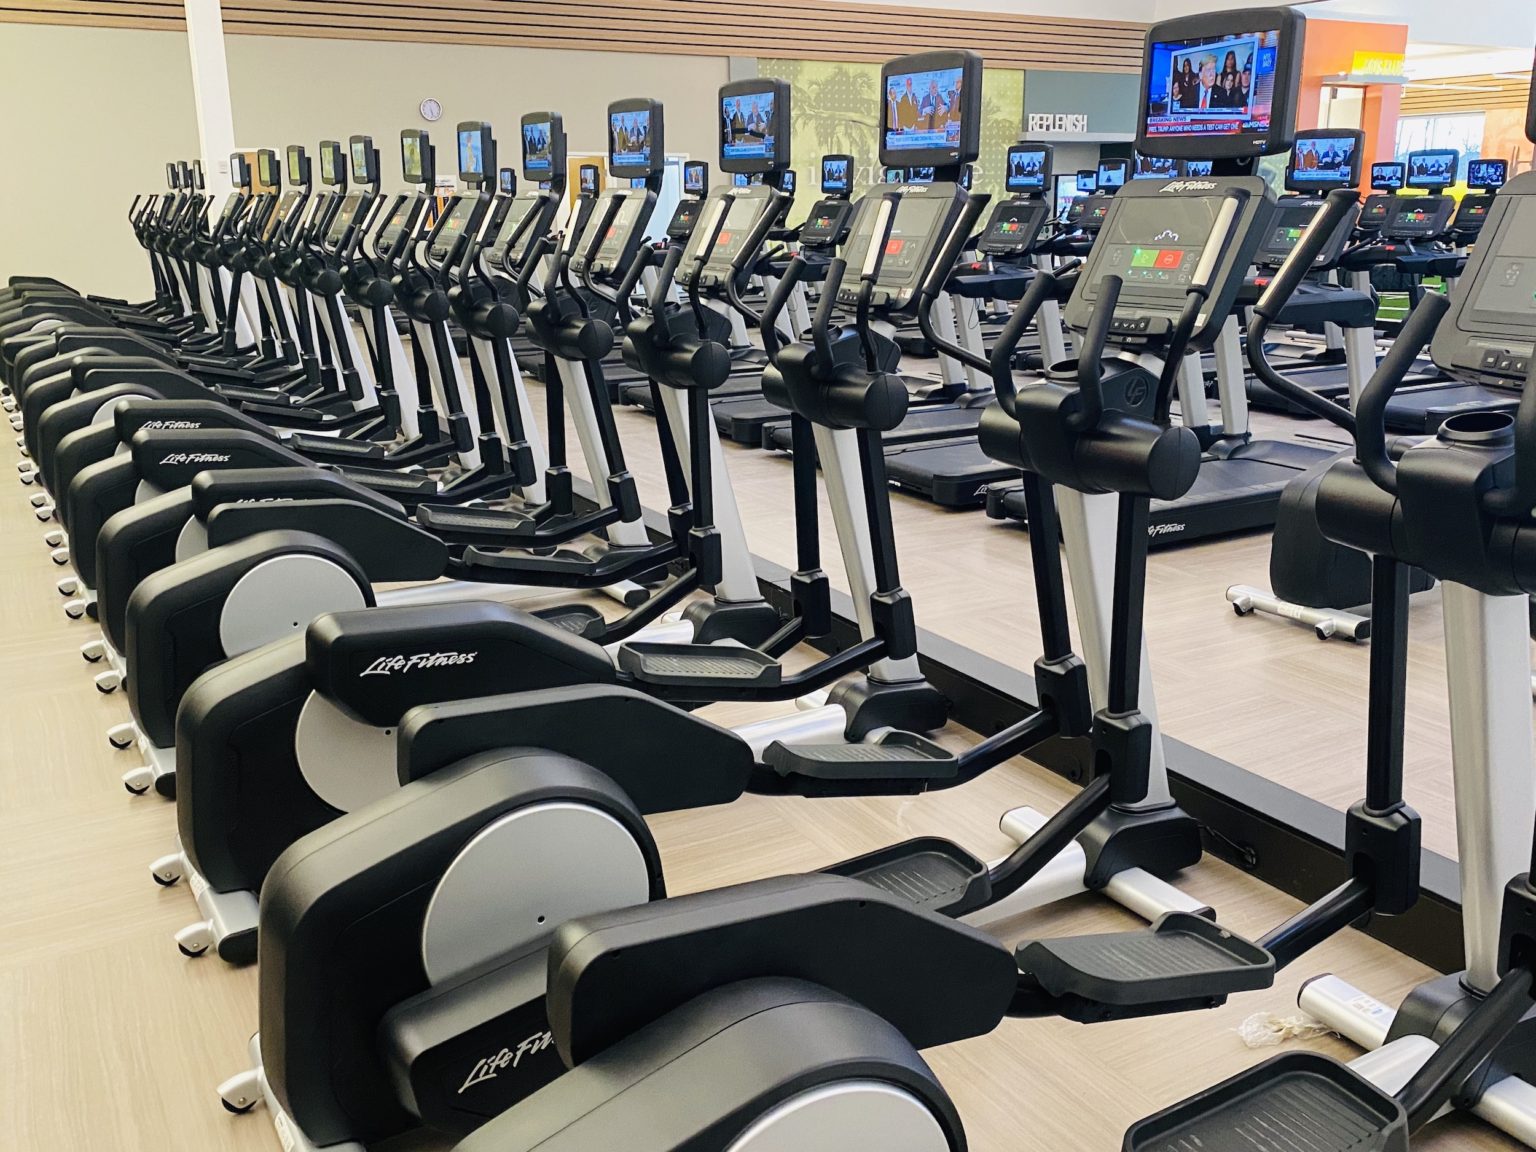 Ashburn’s new LA Fitness prepares for opening day The Burn